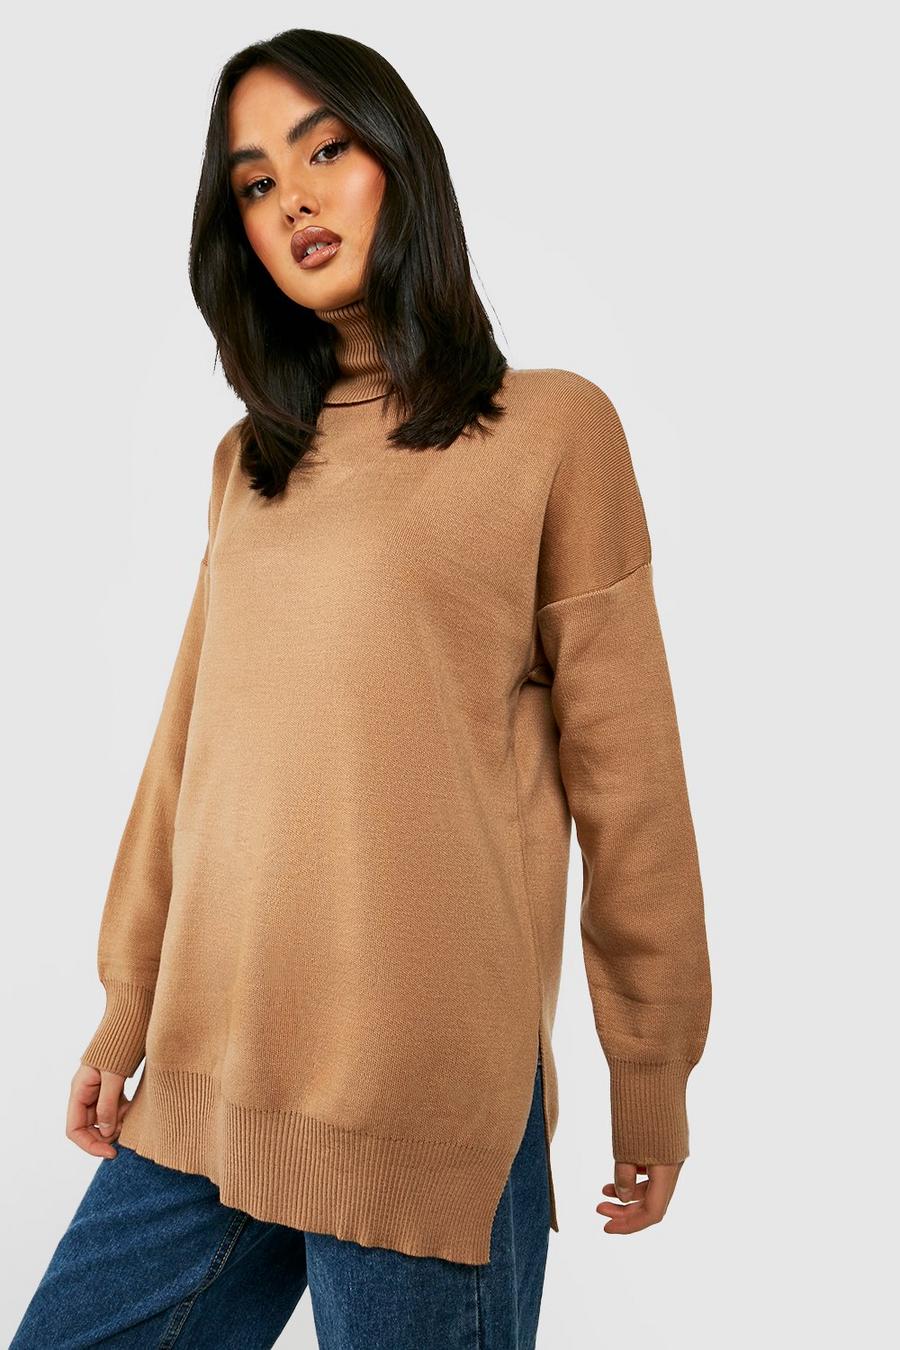 Chocolate brown Knitted Turtleneck Sweater